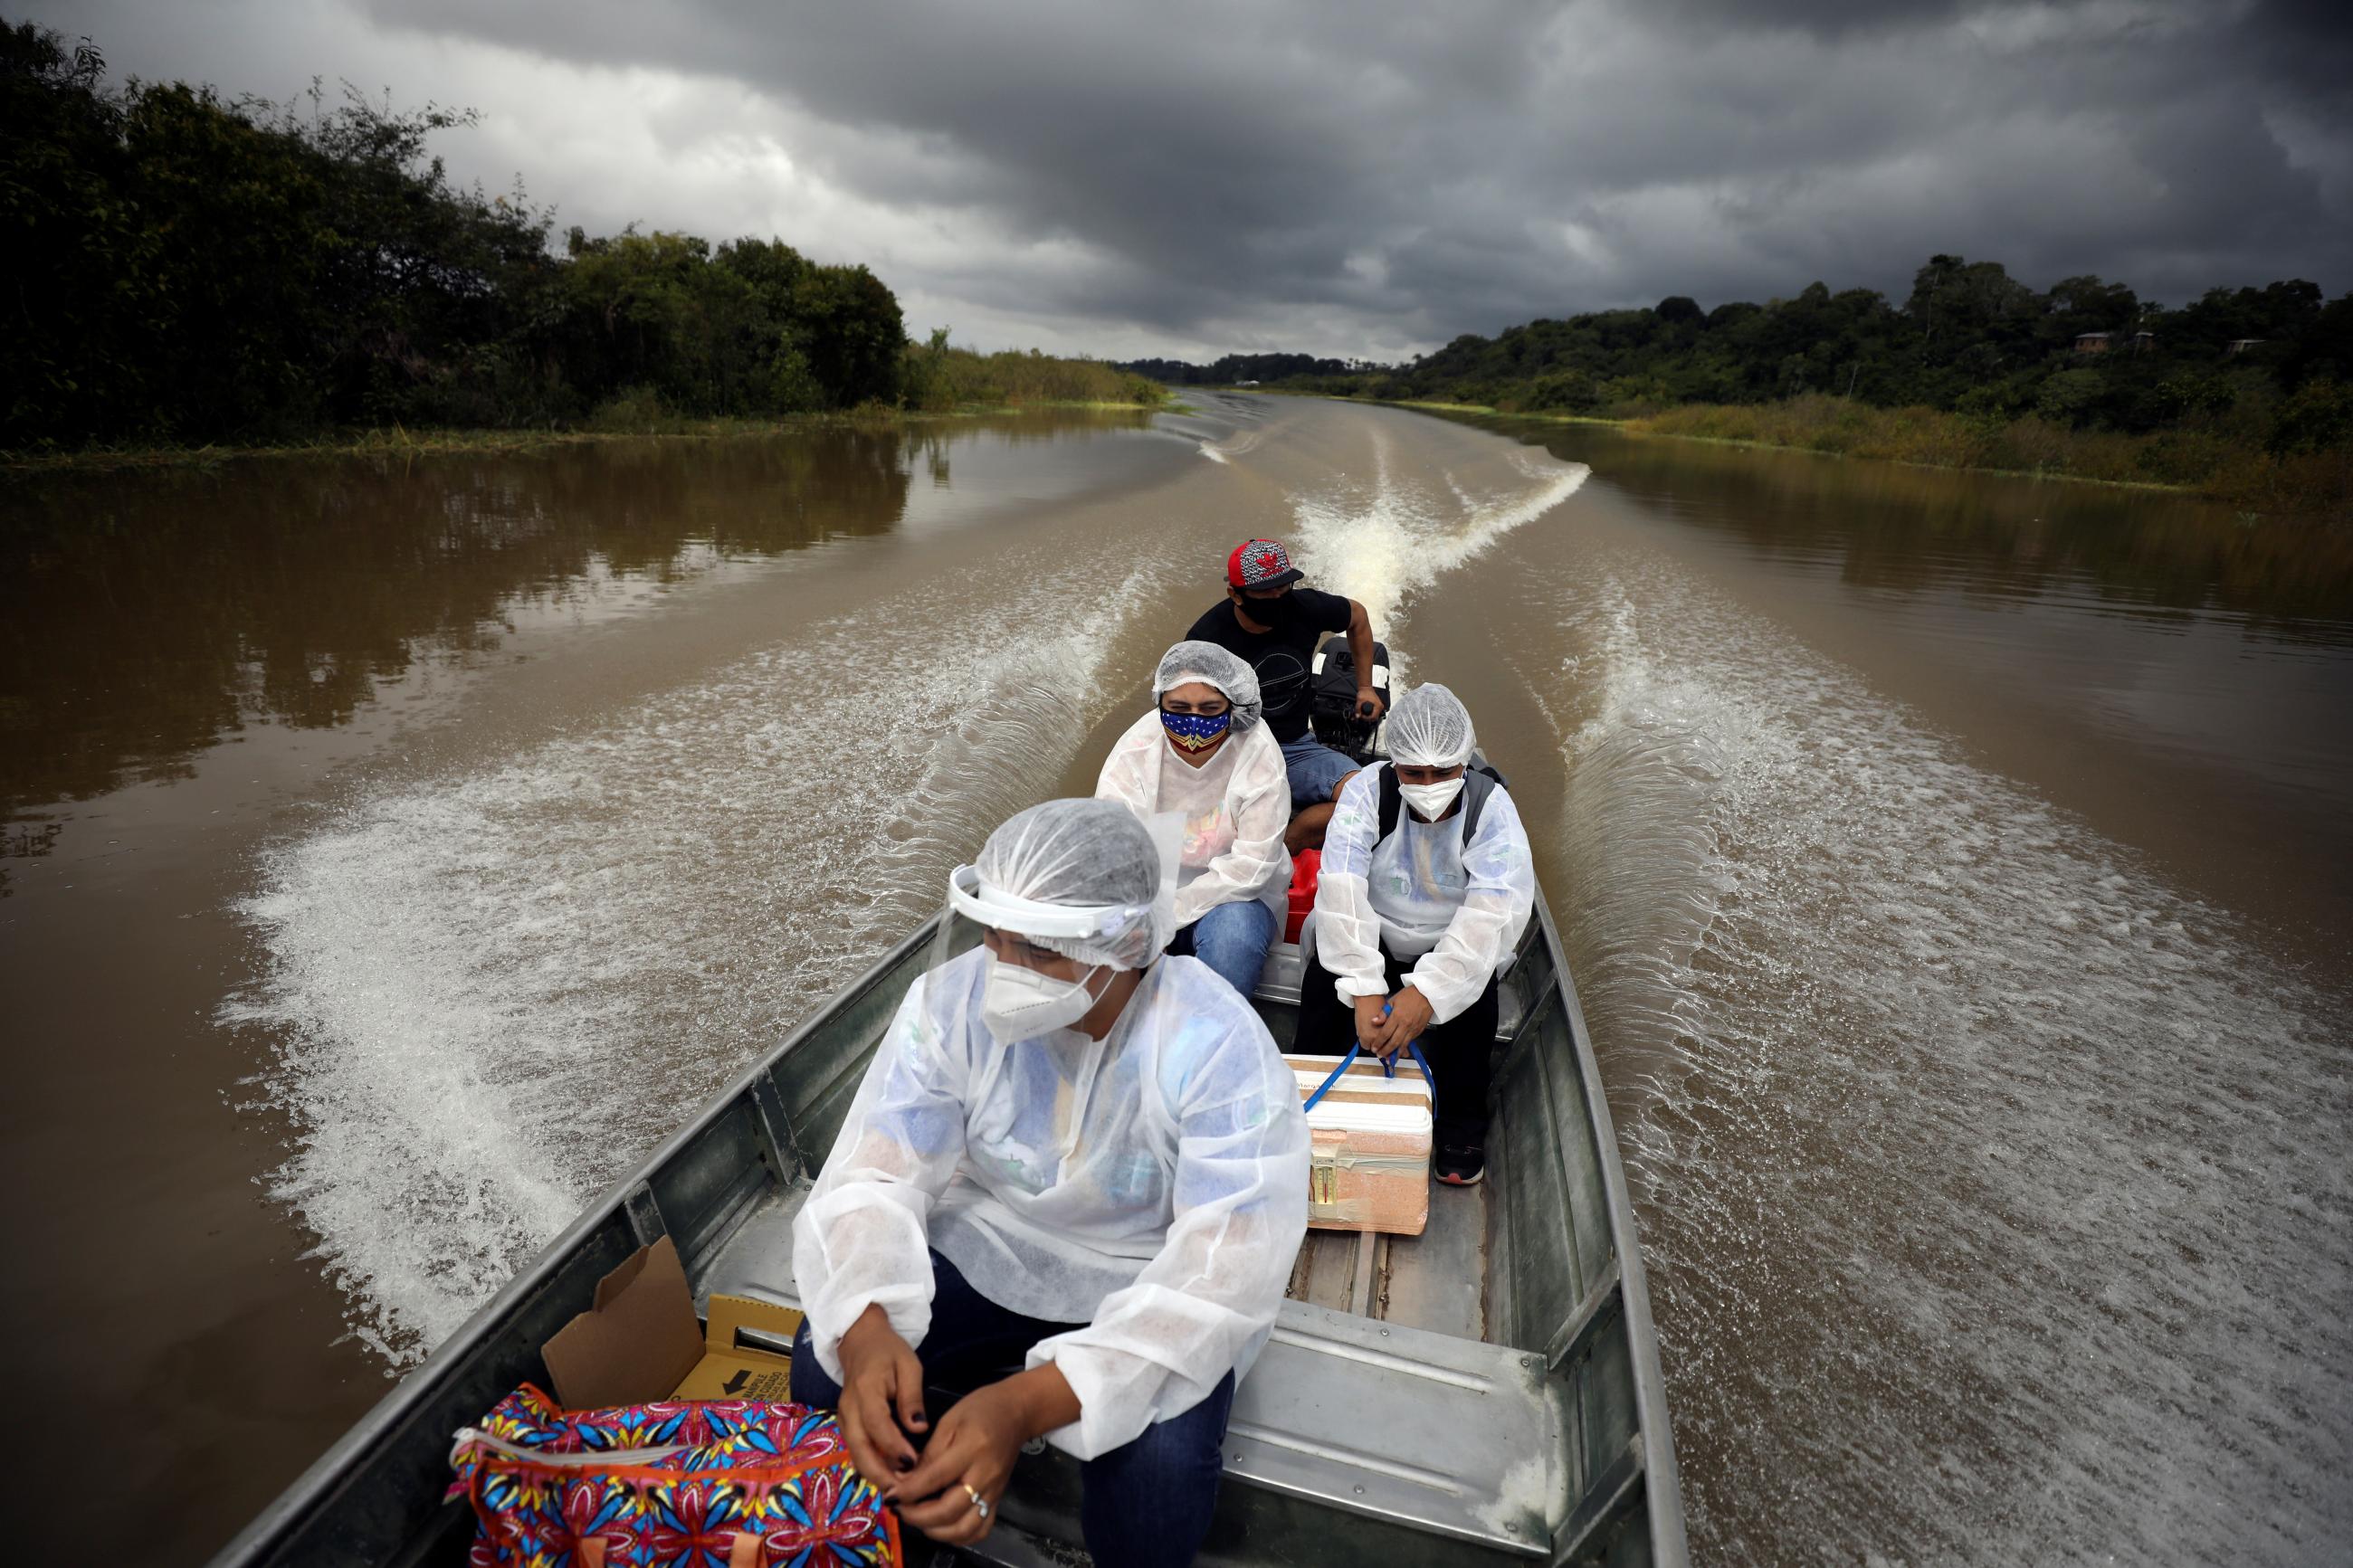 Municipal health workers travel on a boat along the Solimoes river banks, where Ribeirinhos (river dwellers) live, to apply the AstraZeneca/Oxford vaccine for the coronavirus disease (COVID-19) to the residents, in Manacapuru, Amazonas state, Brazil, February 1, 2021. 